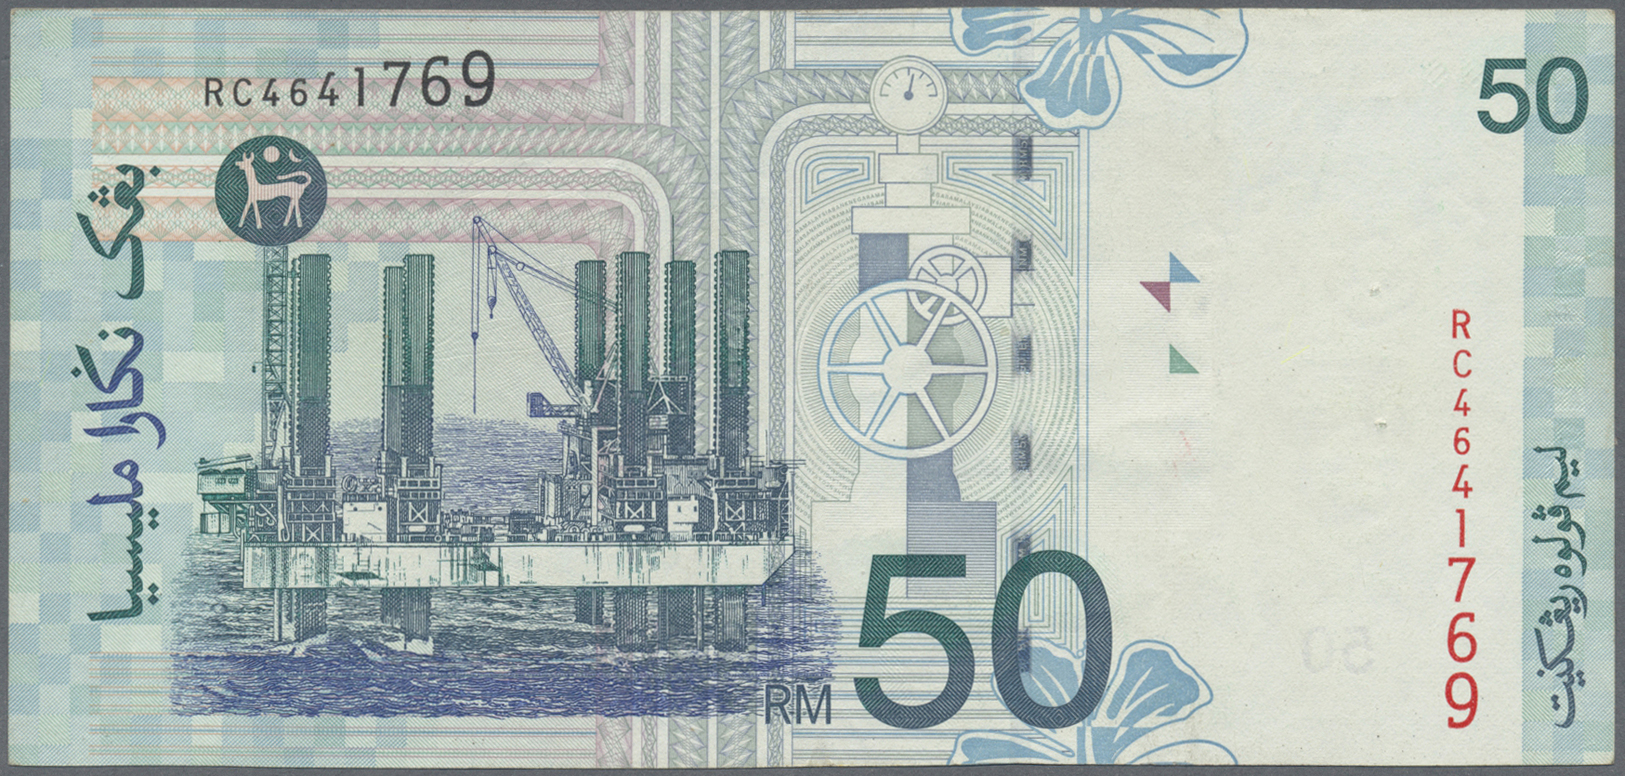 03554 Malaysia: 50 Ringgit ND(1998-2001) P. 43 Error Print At Right Border, The Denomination "50" And Print At Left Bord - Malaysie